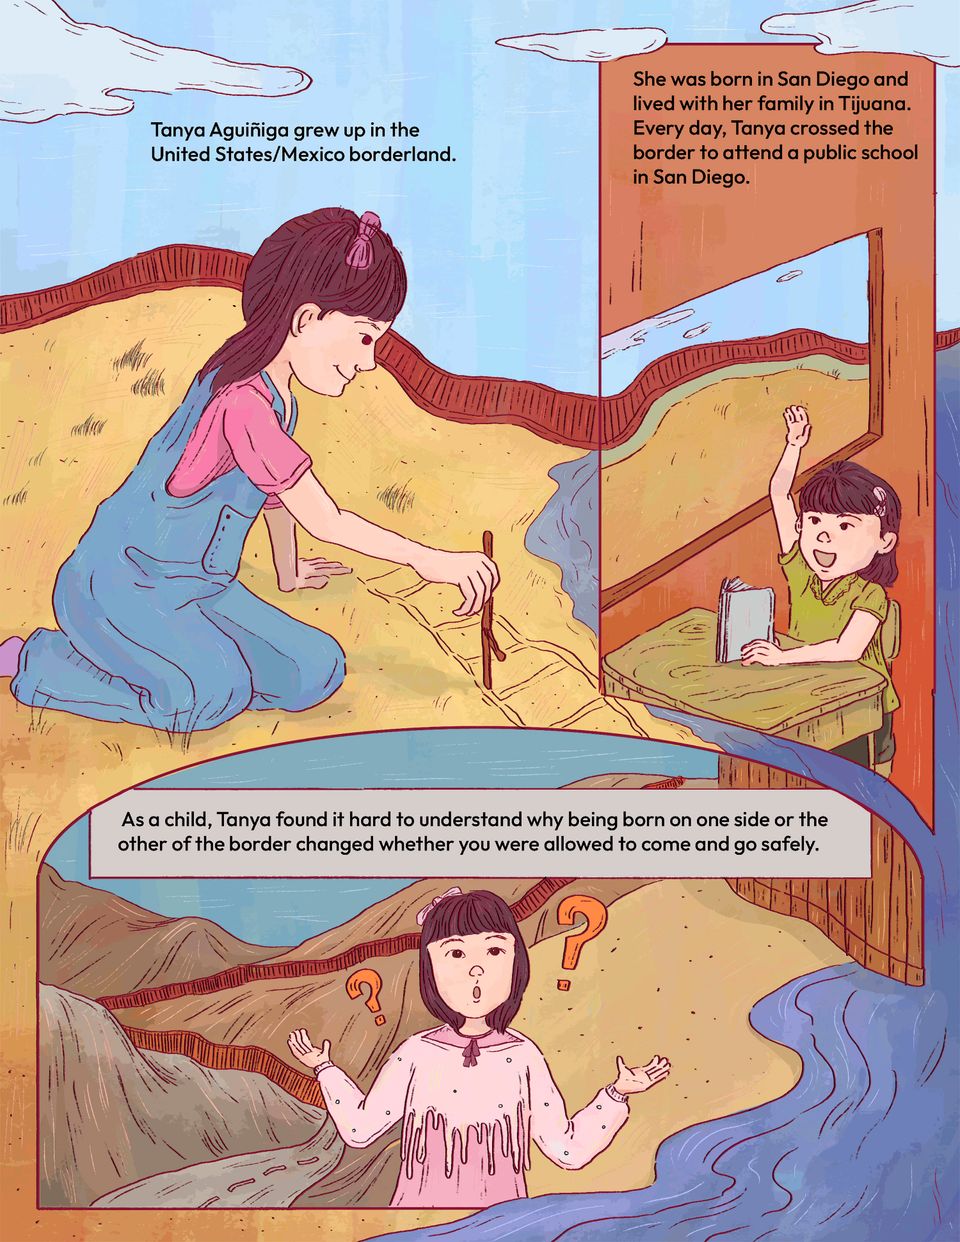 Illustrations of Tanya growing up on the US/Mexico border, with written description.